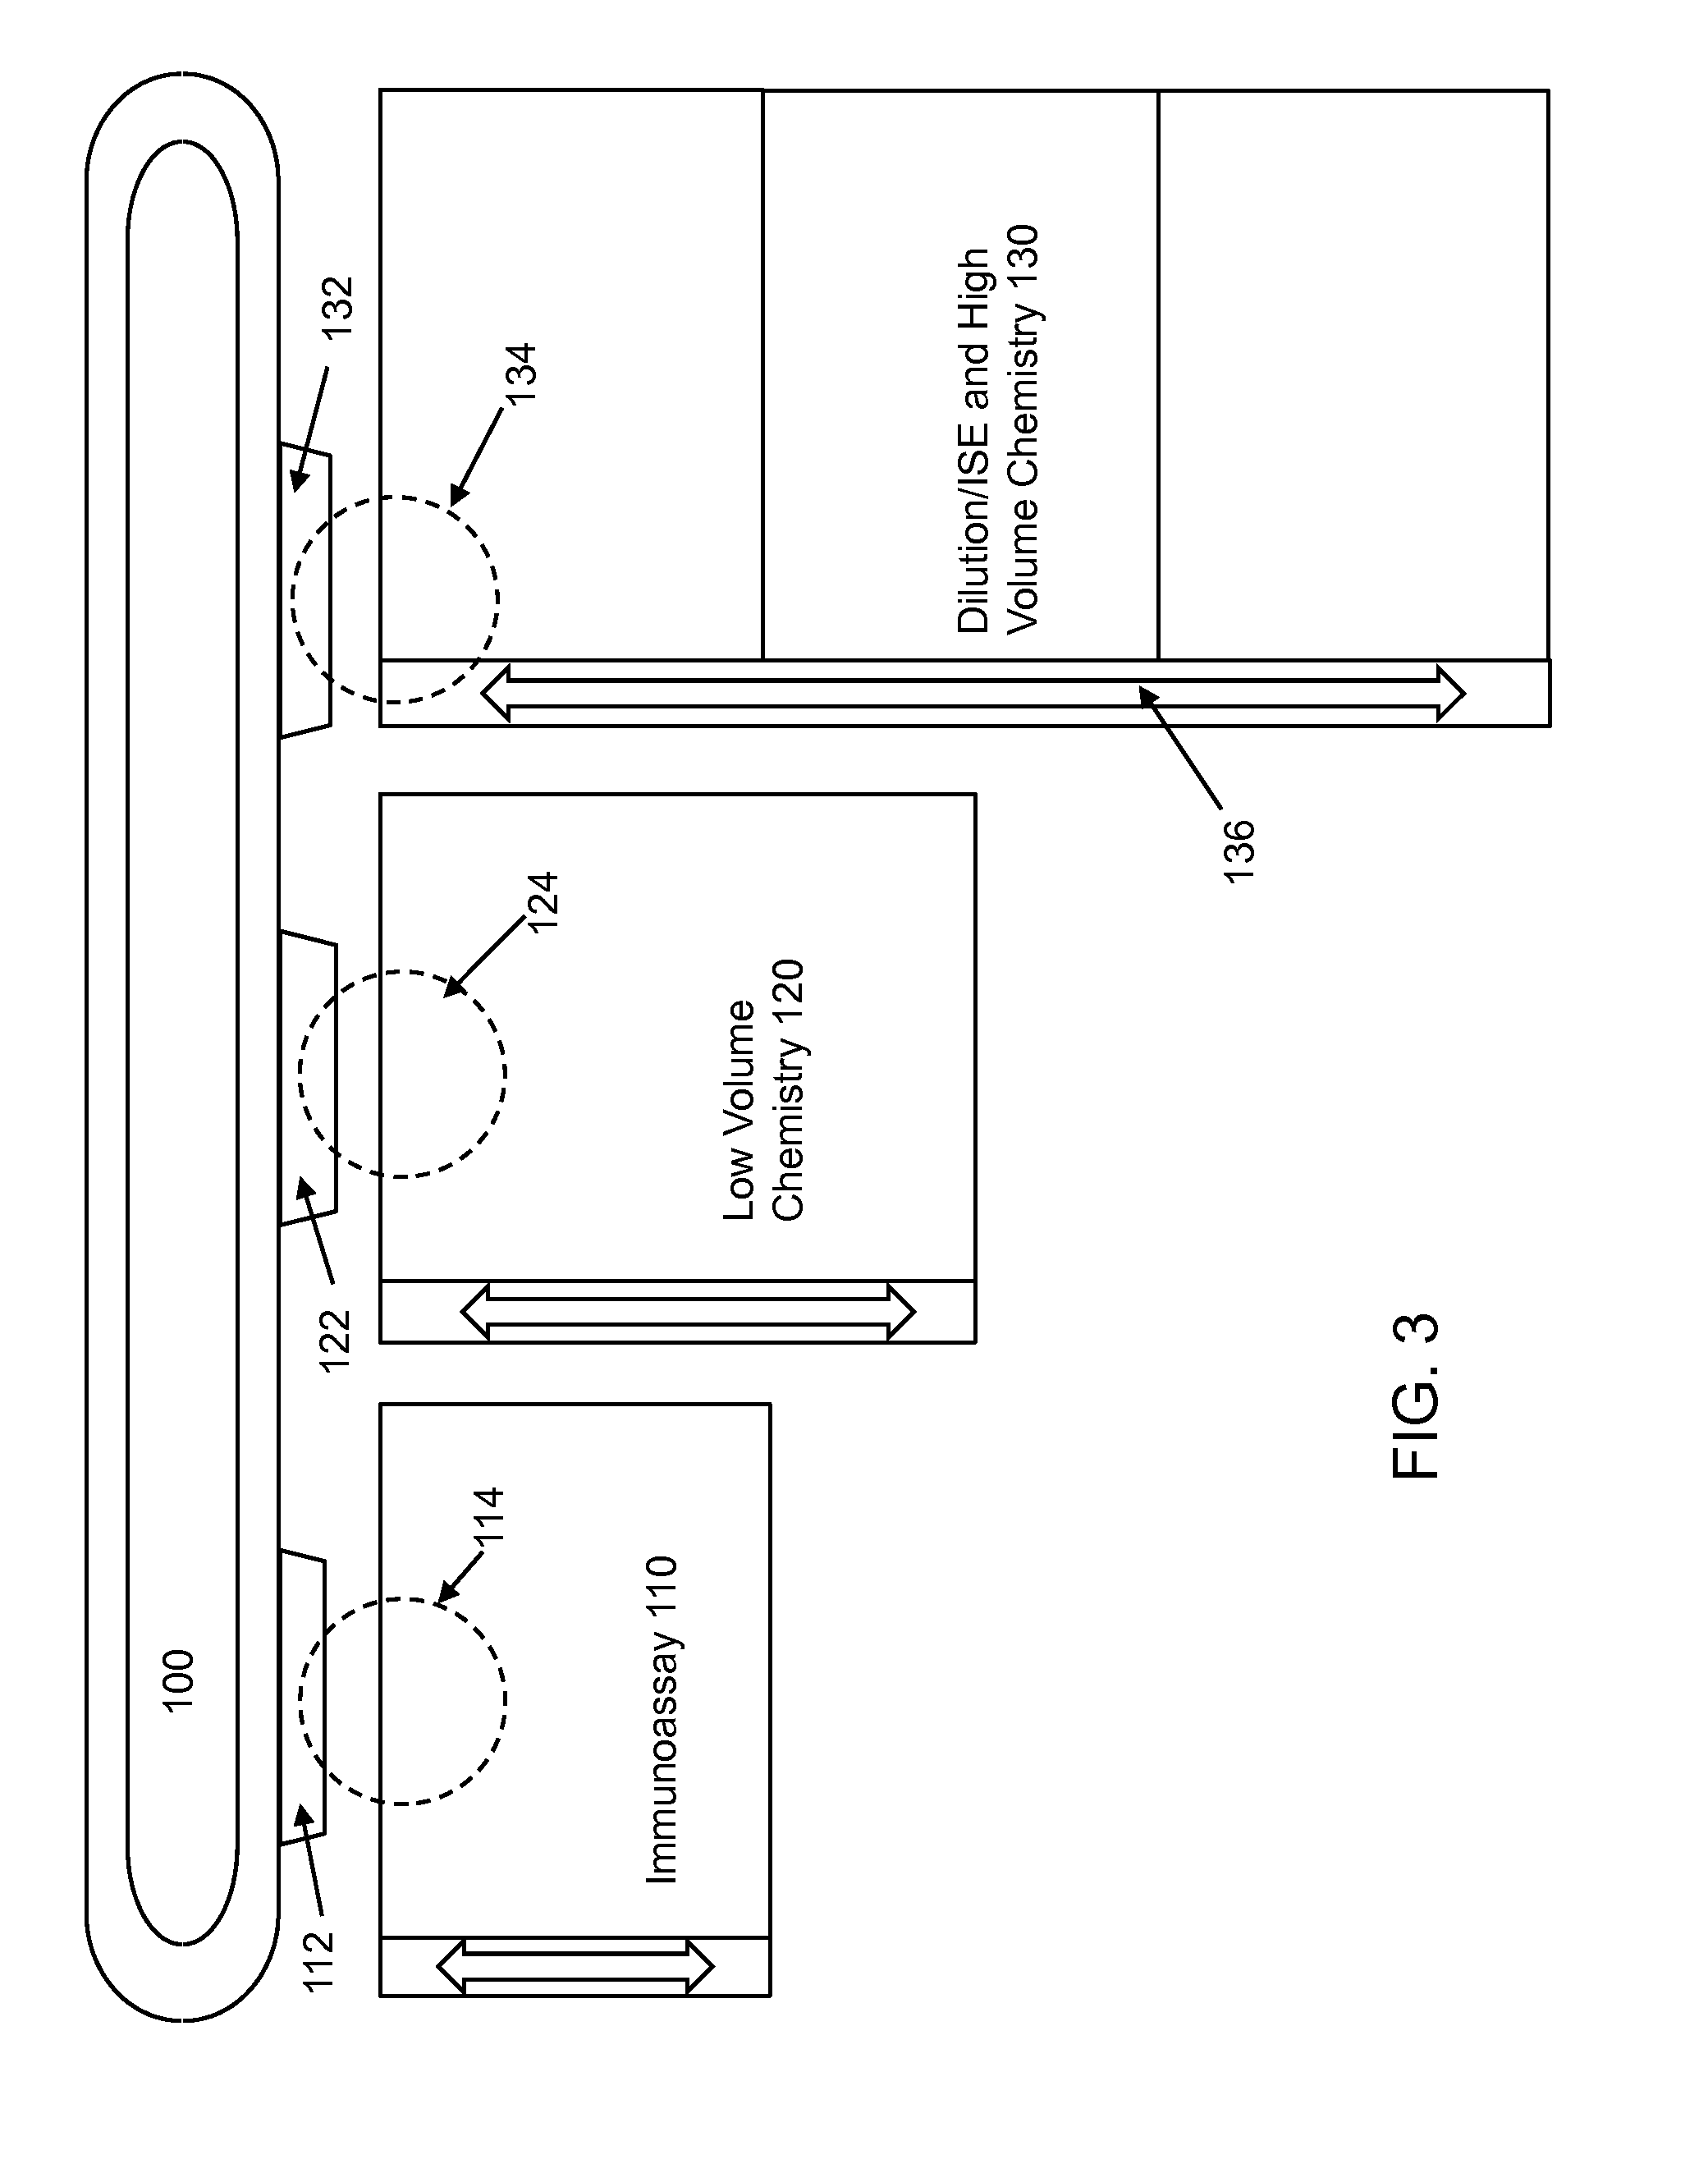 Method for processing priority samples that preserves a FIFO processing queue